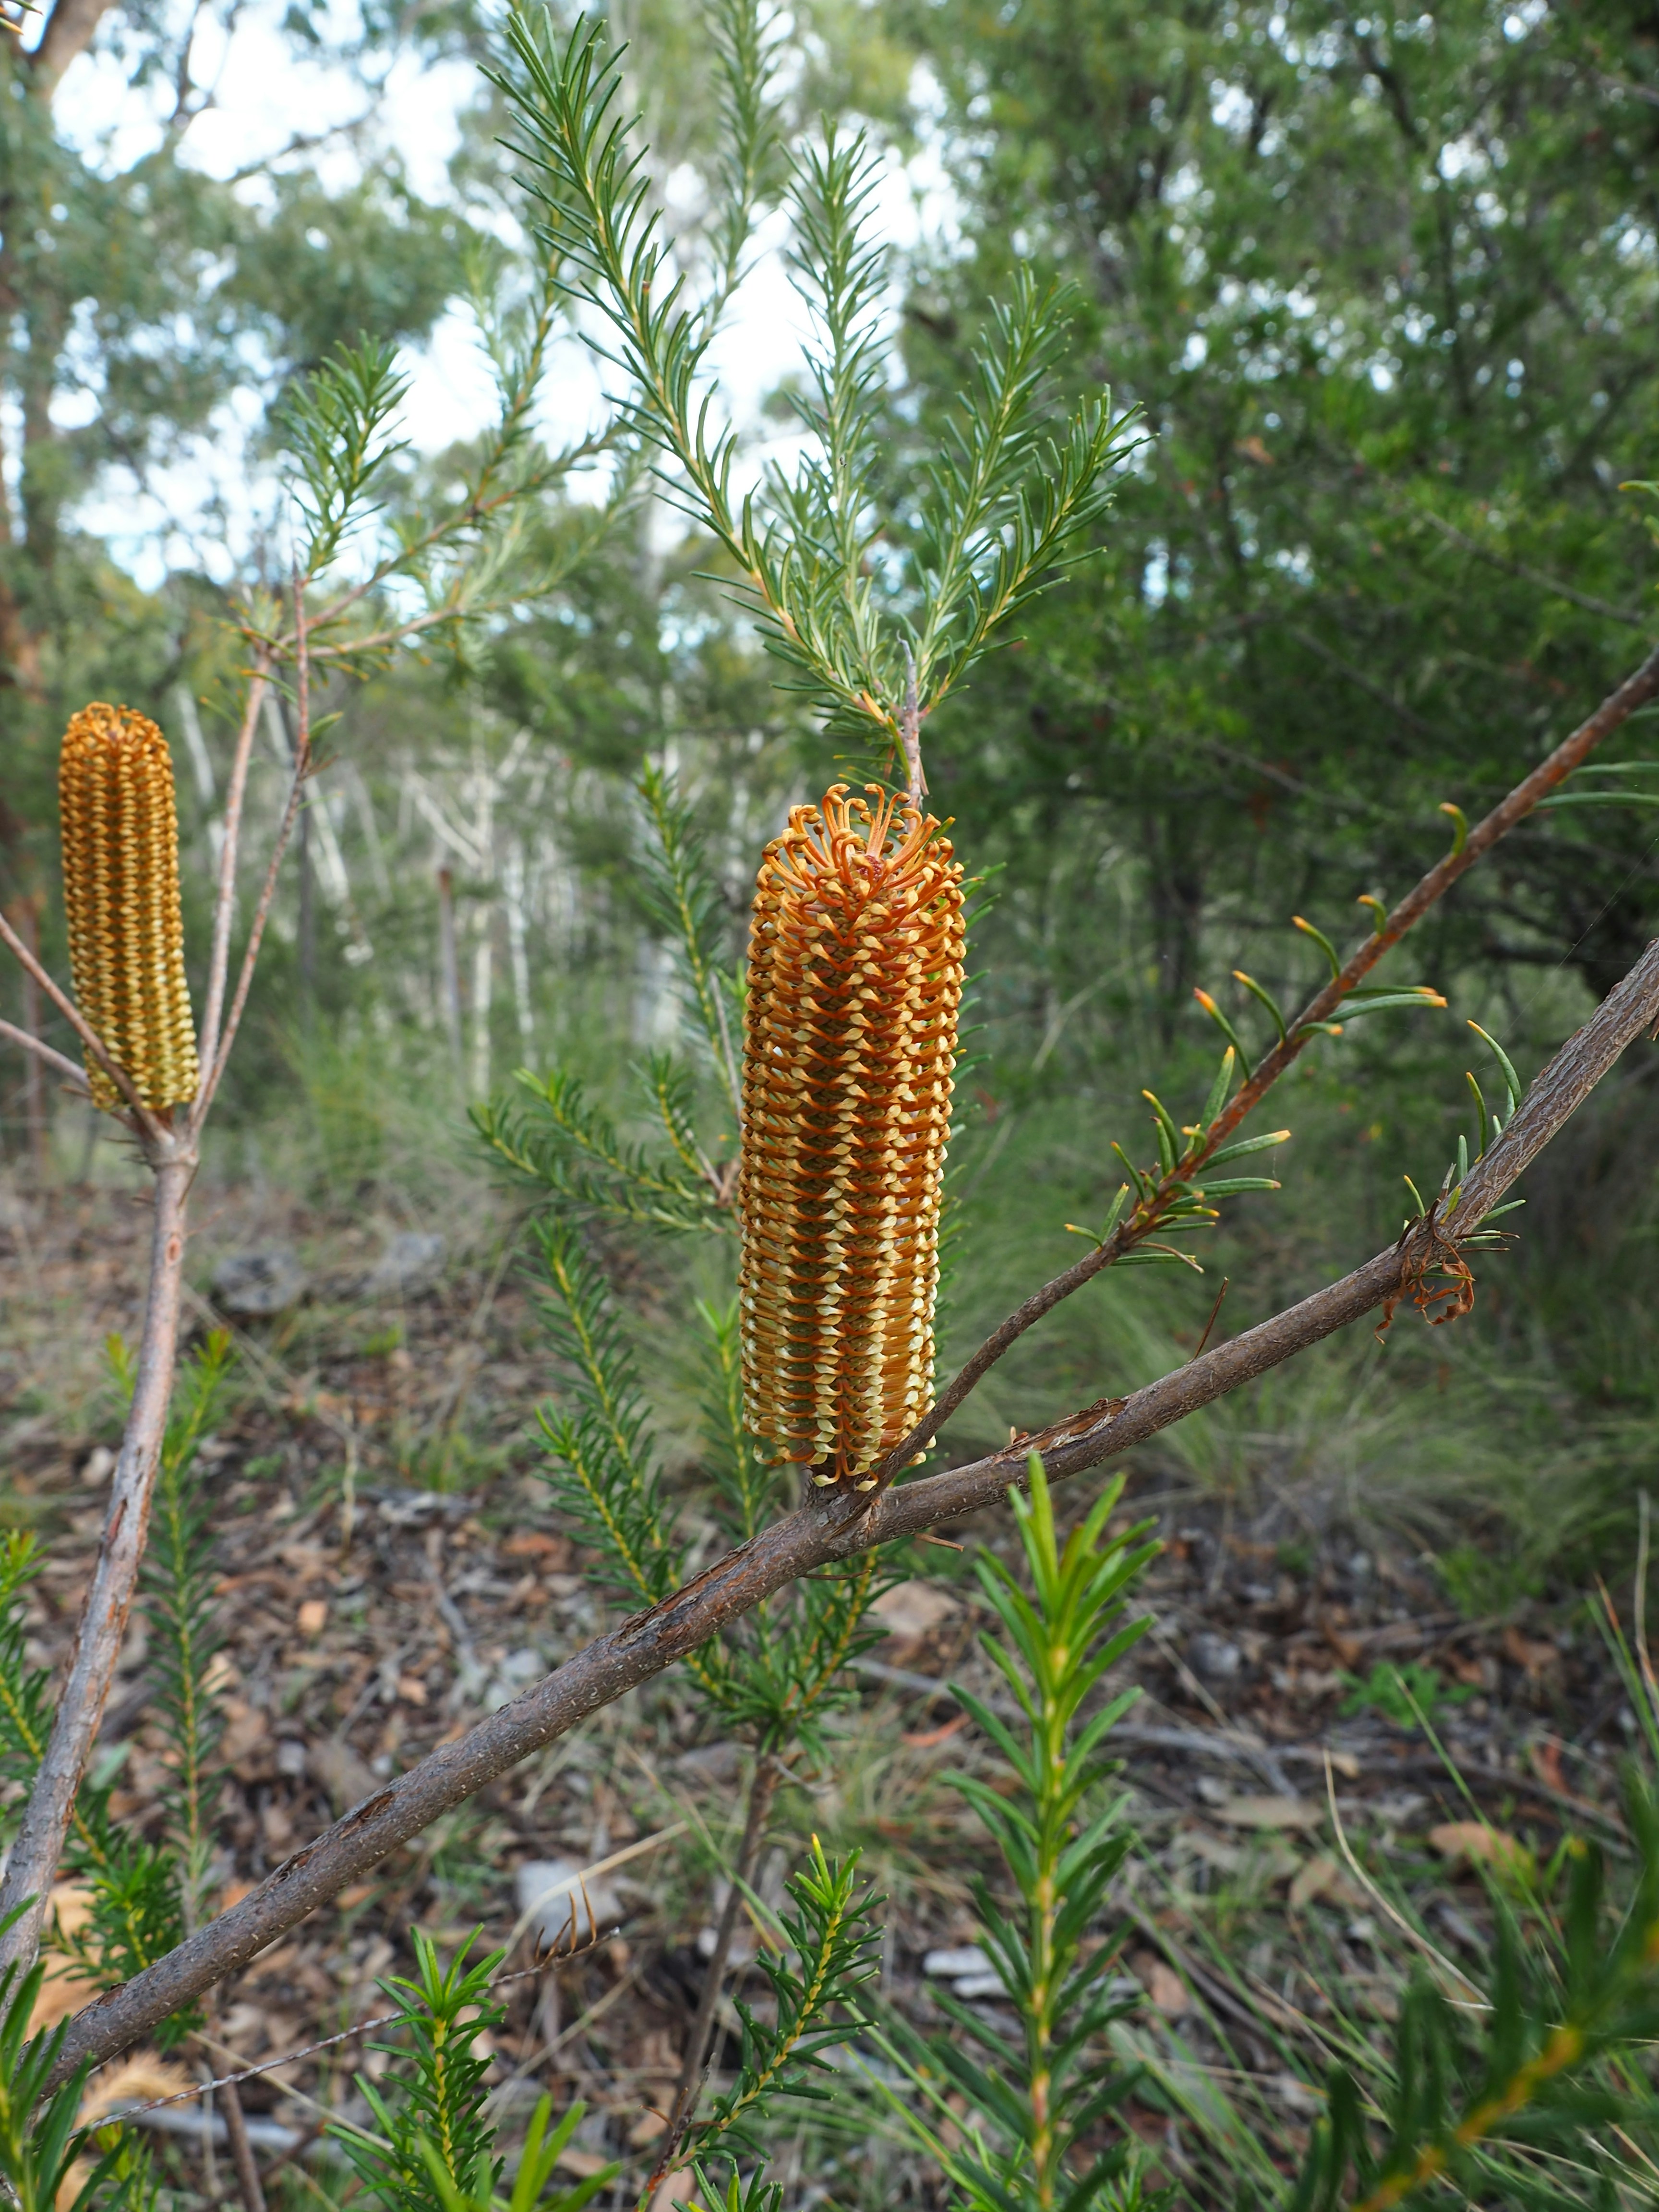 Banksia Ericifolia commercial hybrid - but self sown. At a guess the cockatoos had been around.